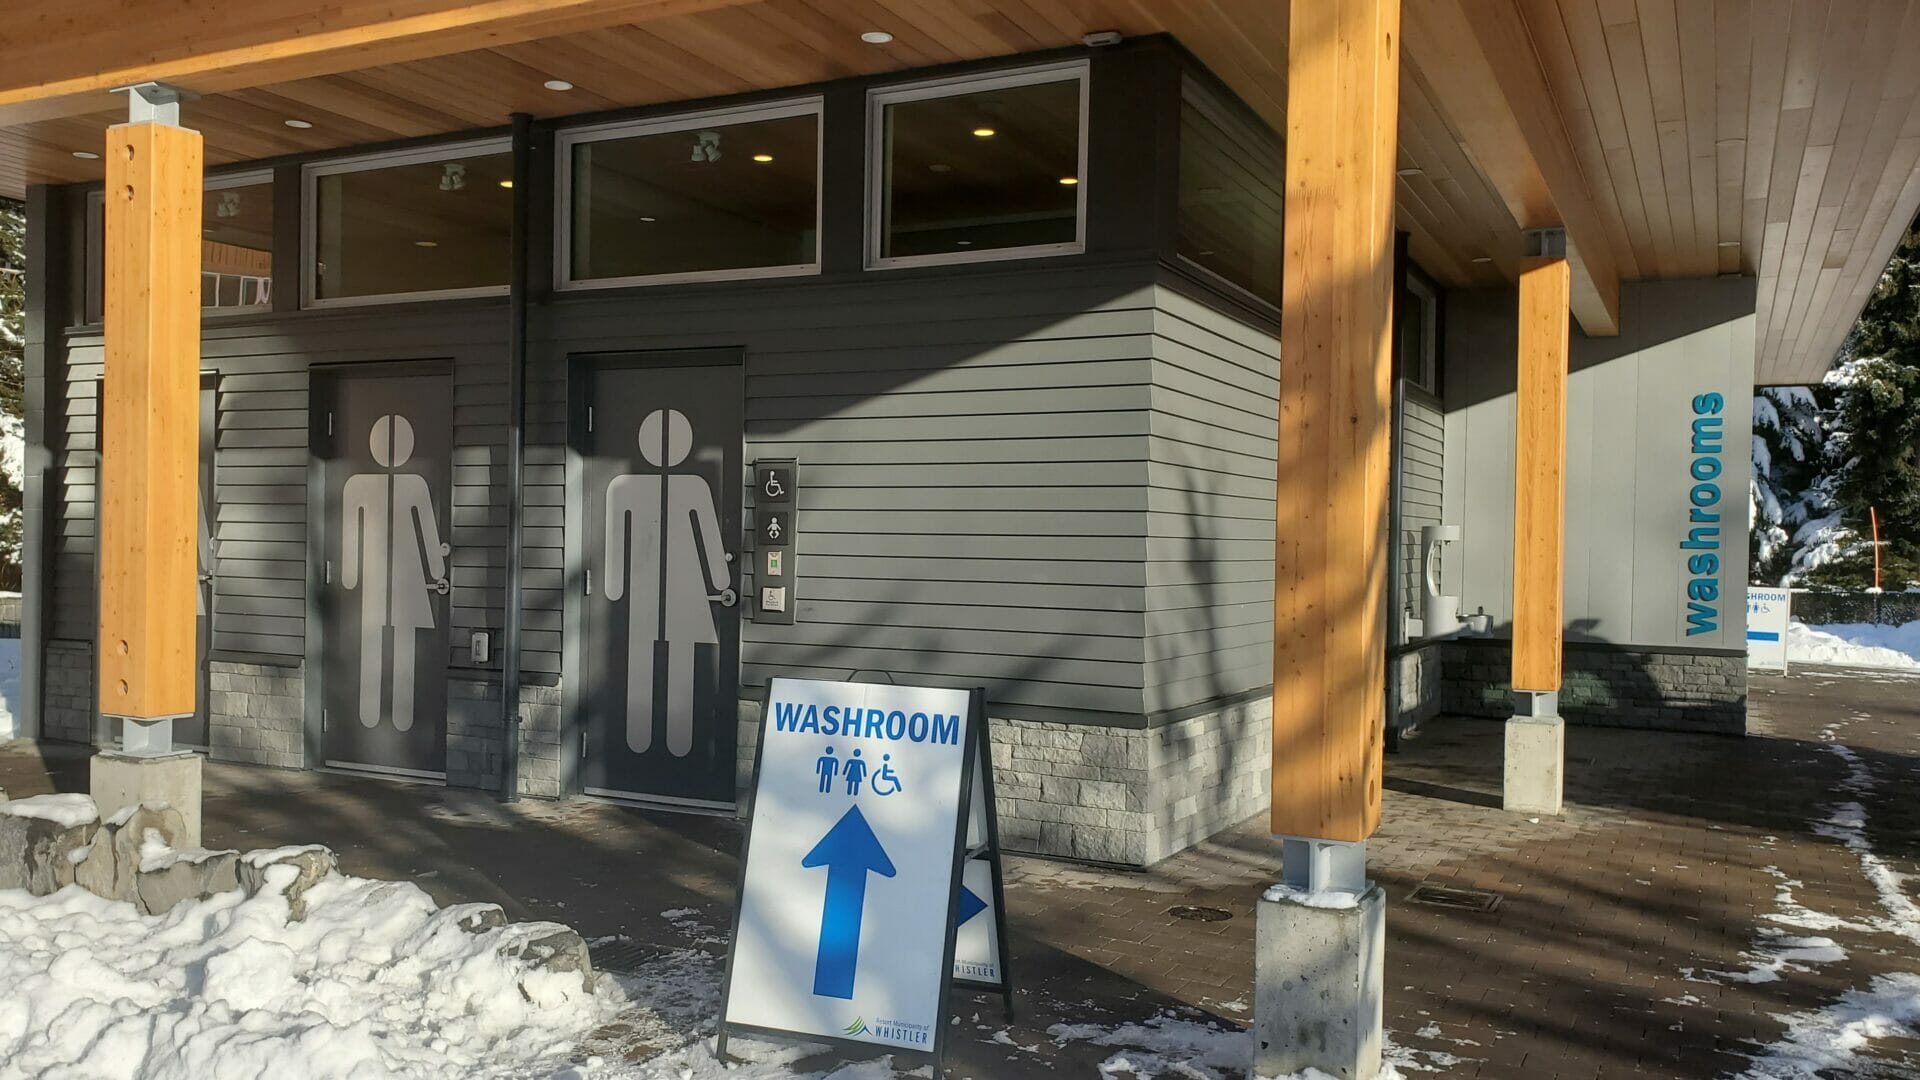 image of entrances to non-gendered washroom facilities